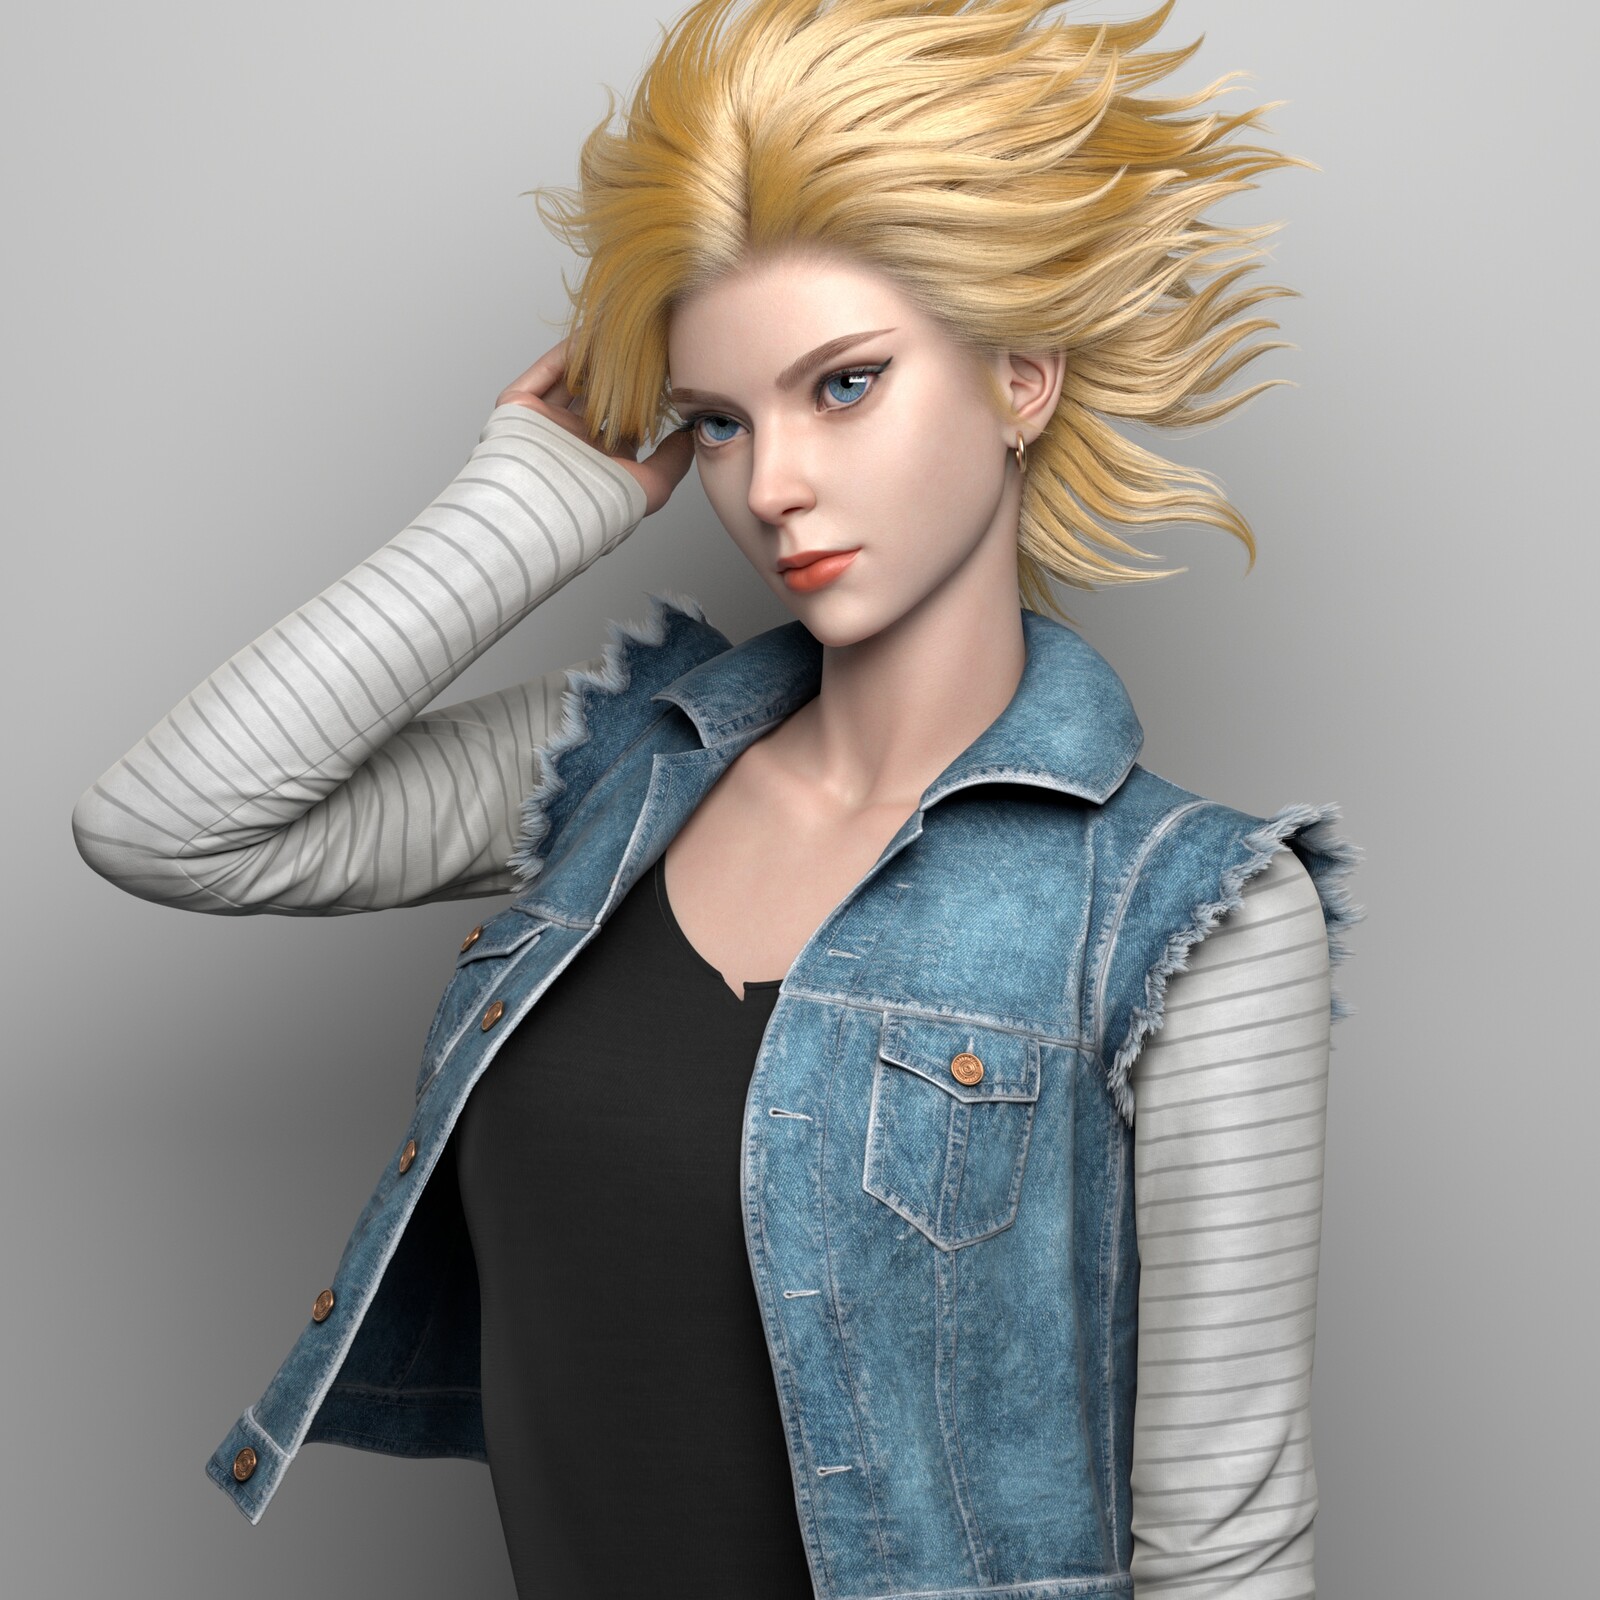  Dragon Ball Z No. 18 android cosplay fanart 3d